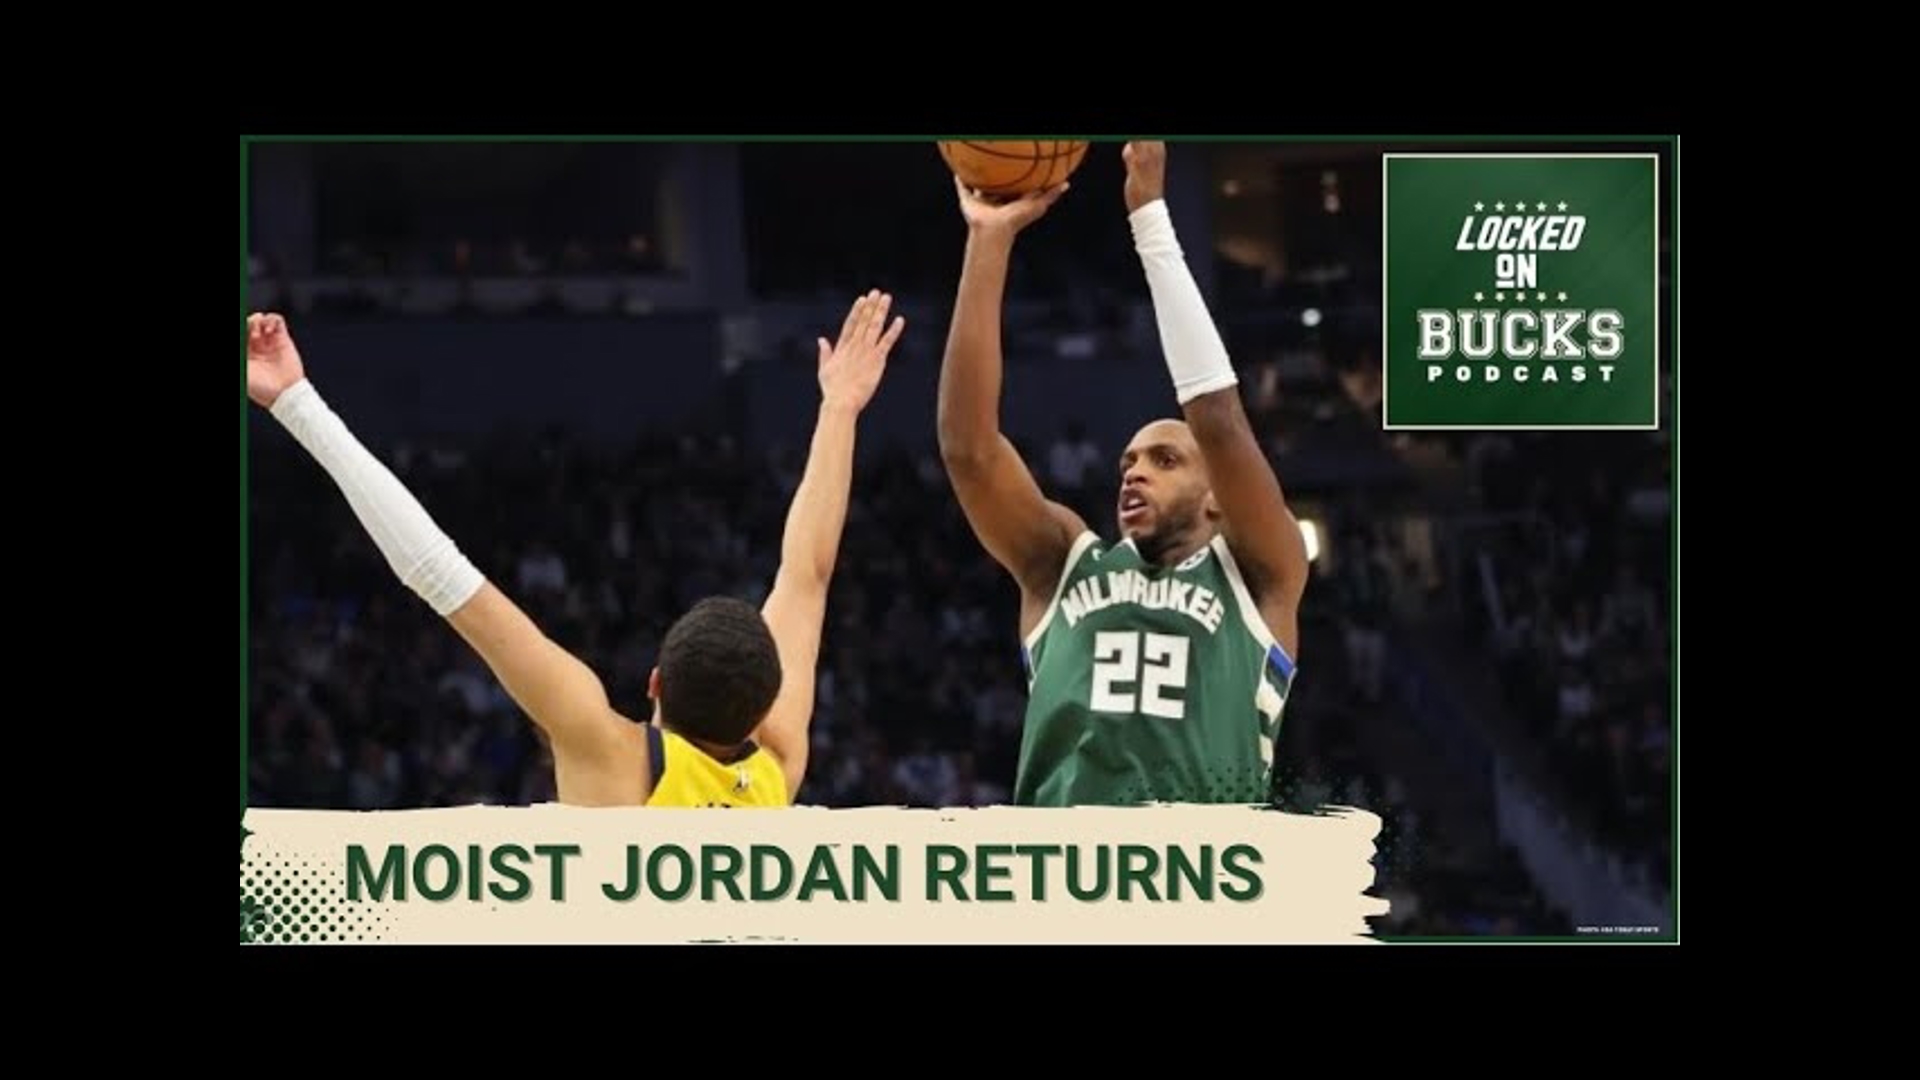 Justin and Frank recap an incredible Khris Middleton performance, a better Bucks defensive performance and a gritty comeback, ultimately resulting in a loss.